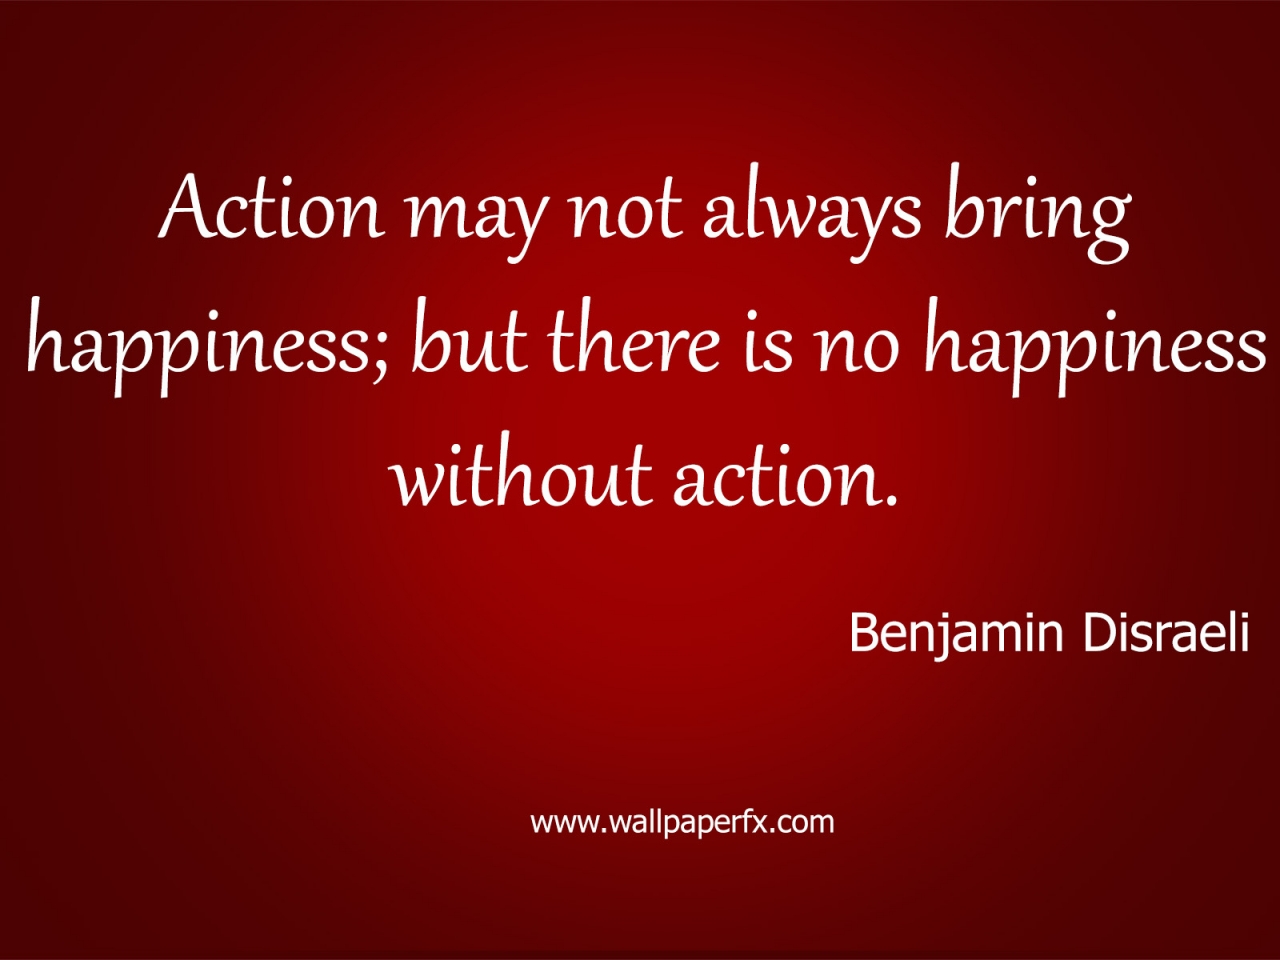 Benjamin Disraeli Happiness Quote for 1280 x 960 resolution